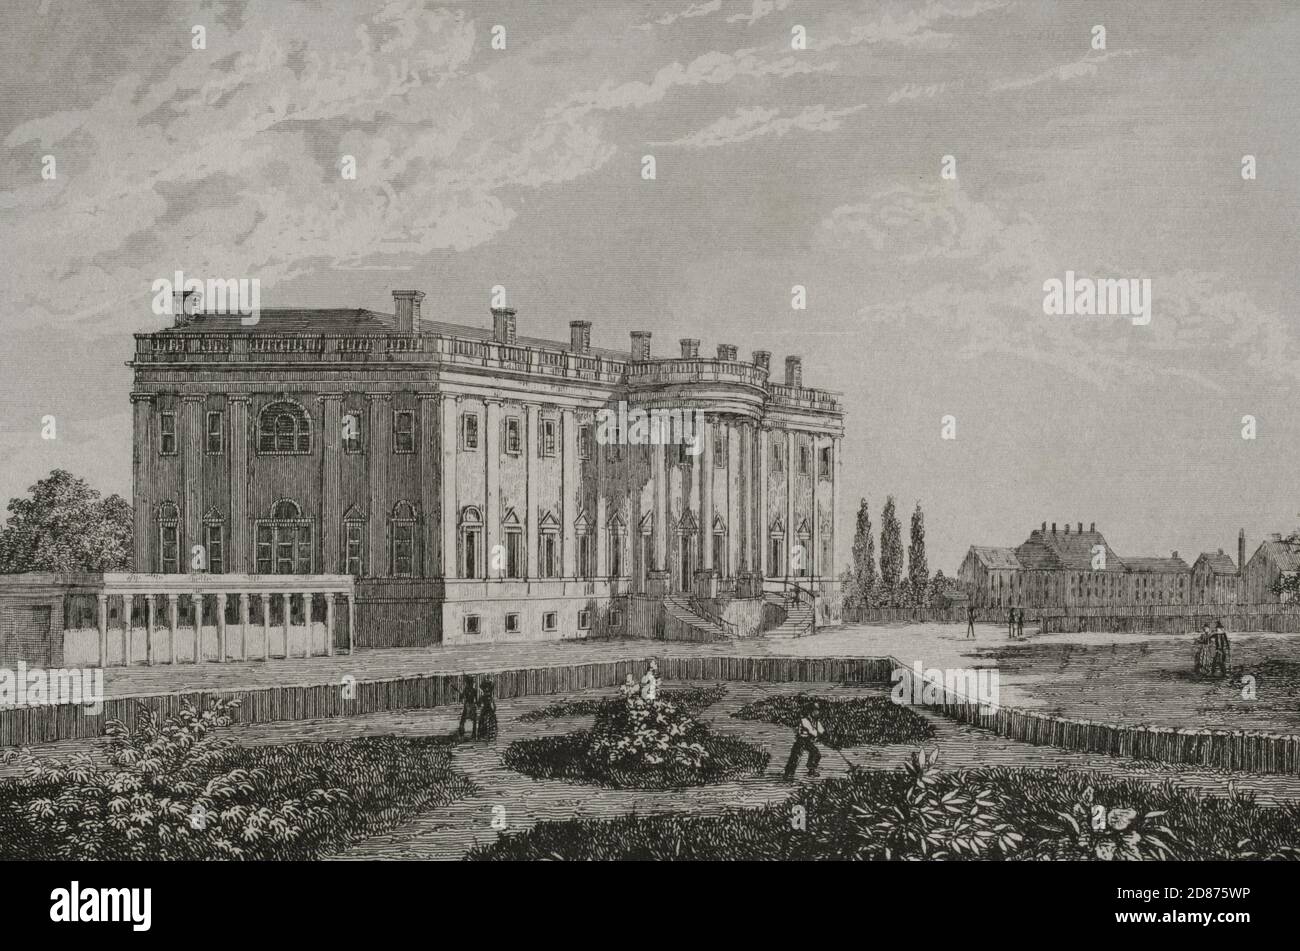 United States, Washington D.C. The White House. Designed by James Hoban (1758-1831), in Neoclassical style, its construction took place between 1792 and 1800. It has been the residence of every U.S, president since John Adams in 1800. Engraving by Arnout. Panorama Universal. History of the United States of America, from 1st edition of Jean B.G. Roux de Rochelle's Etats-Unis d'Amérique in 1837. Spanish edition, printed in Barcelona, 1850. Stock Photo